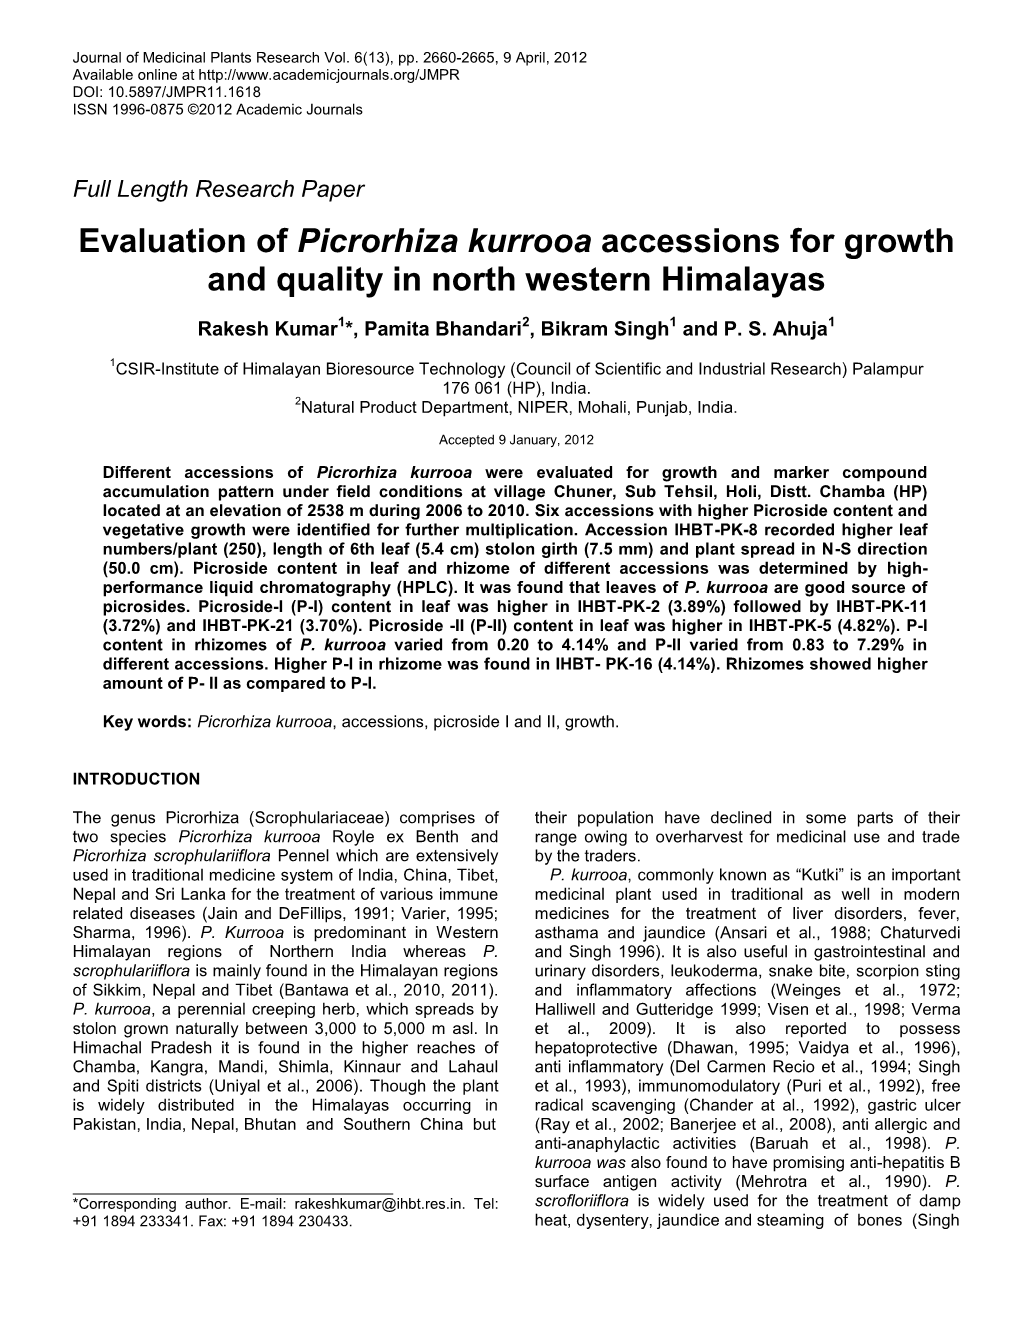 Evaluation of Picrorhiza Kurrooa Accessions for Growth and Quality in North Western Himalayas